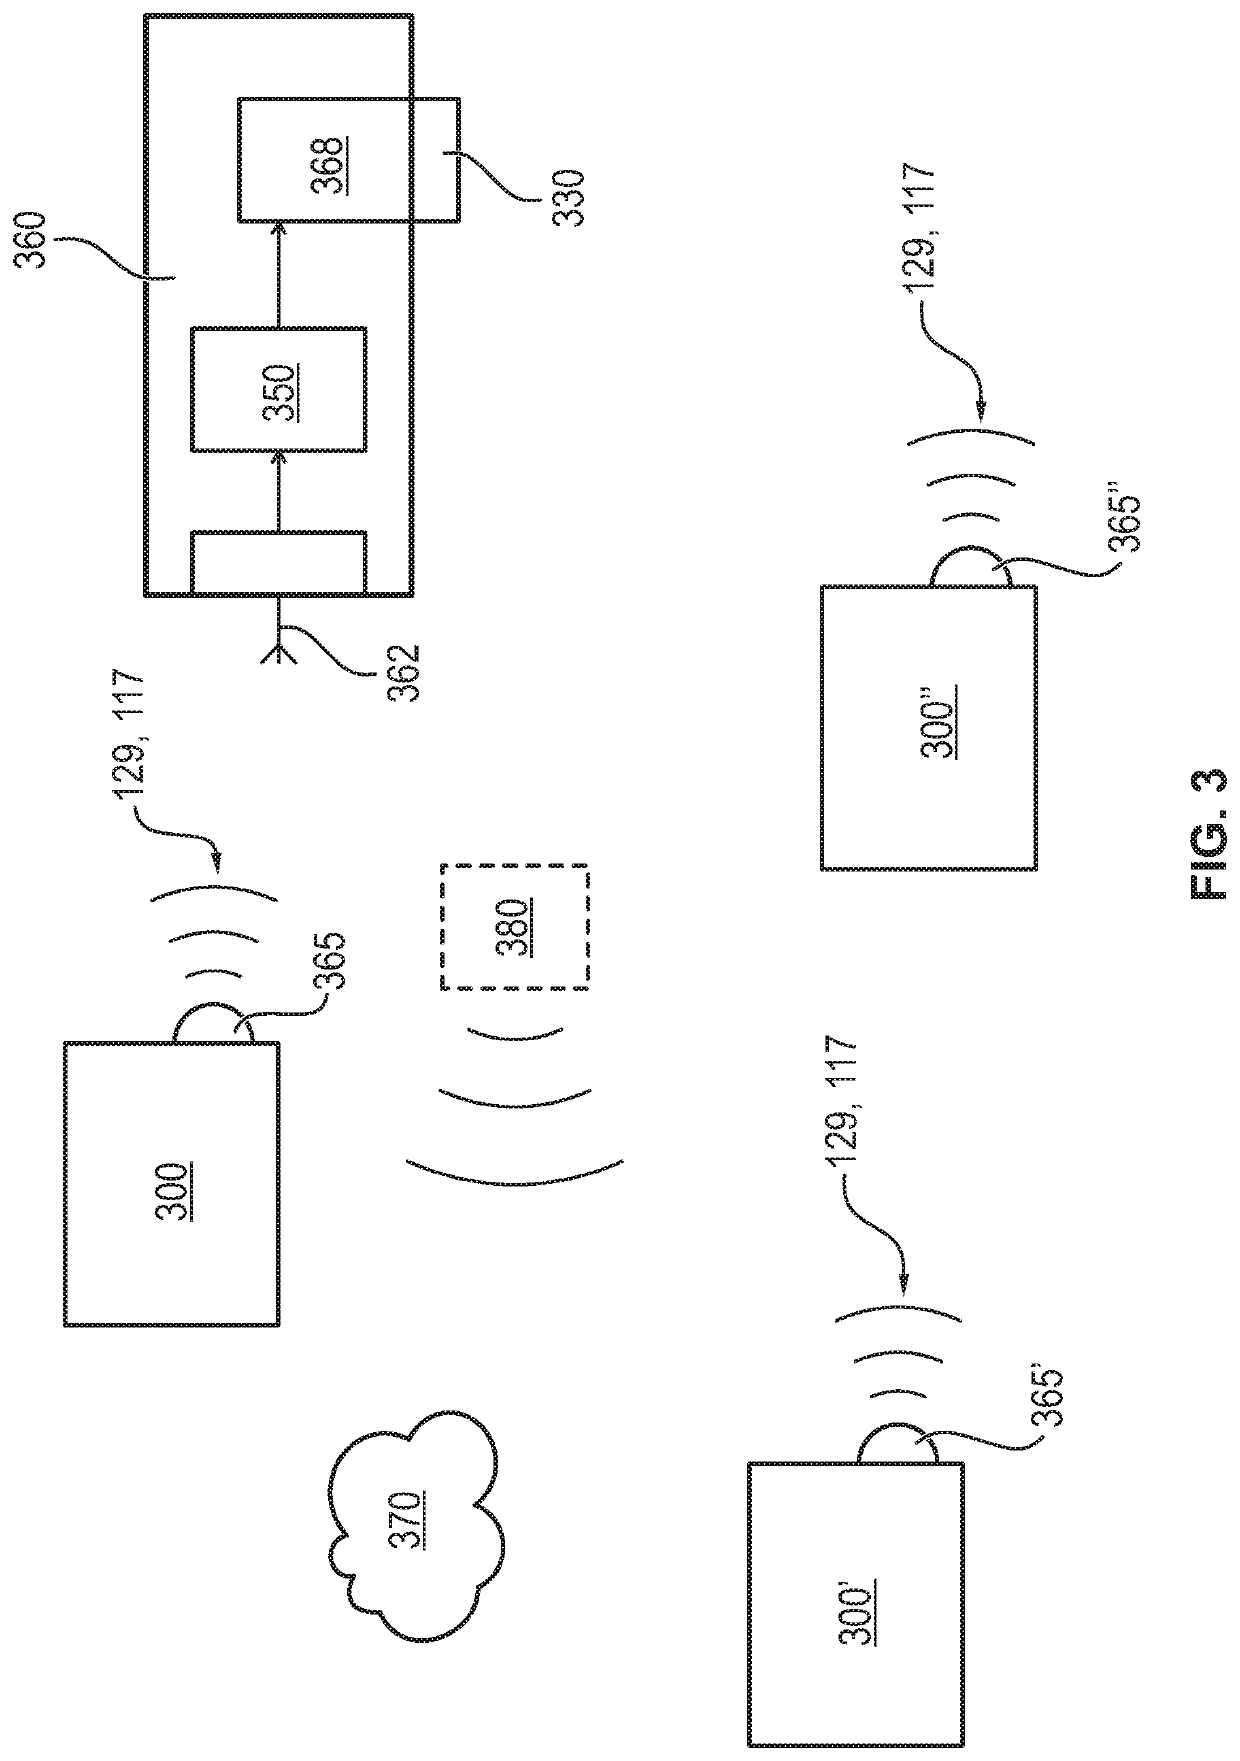 Device and process for monitoring sound and gas exposure